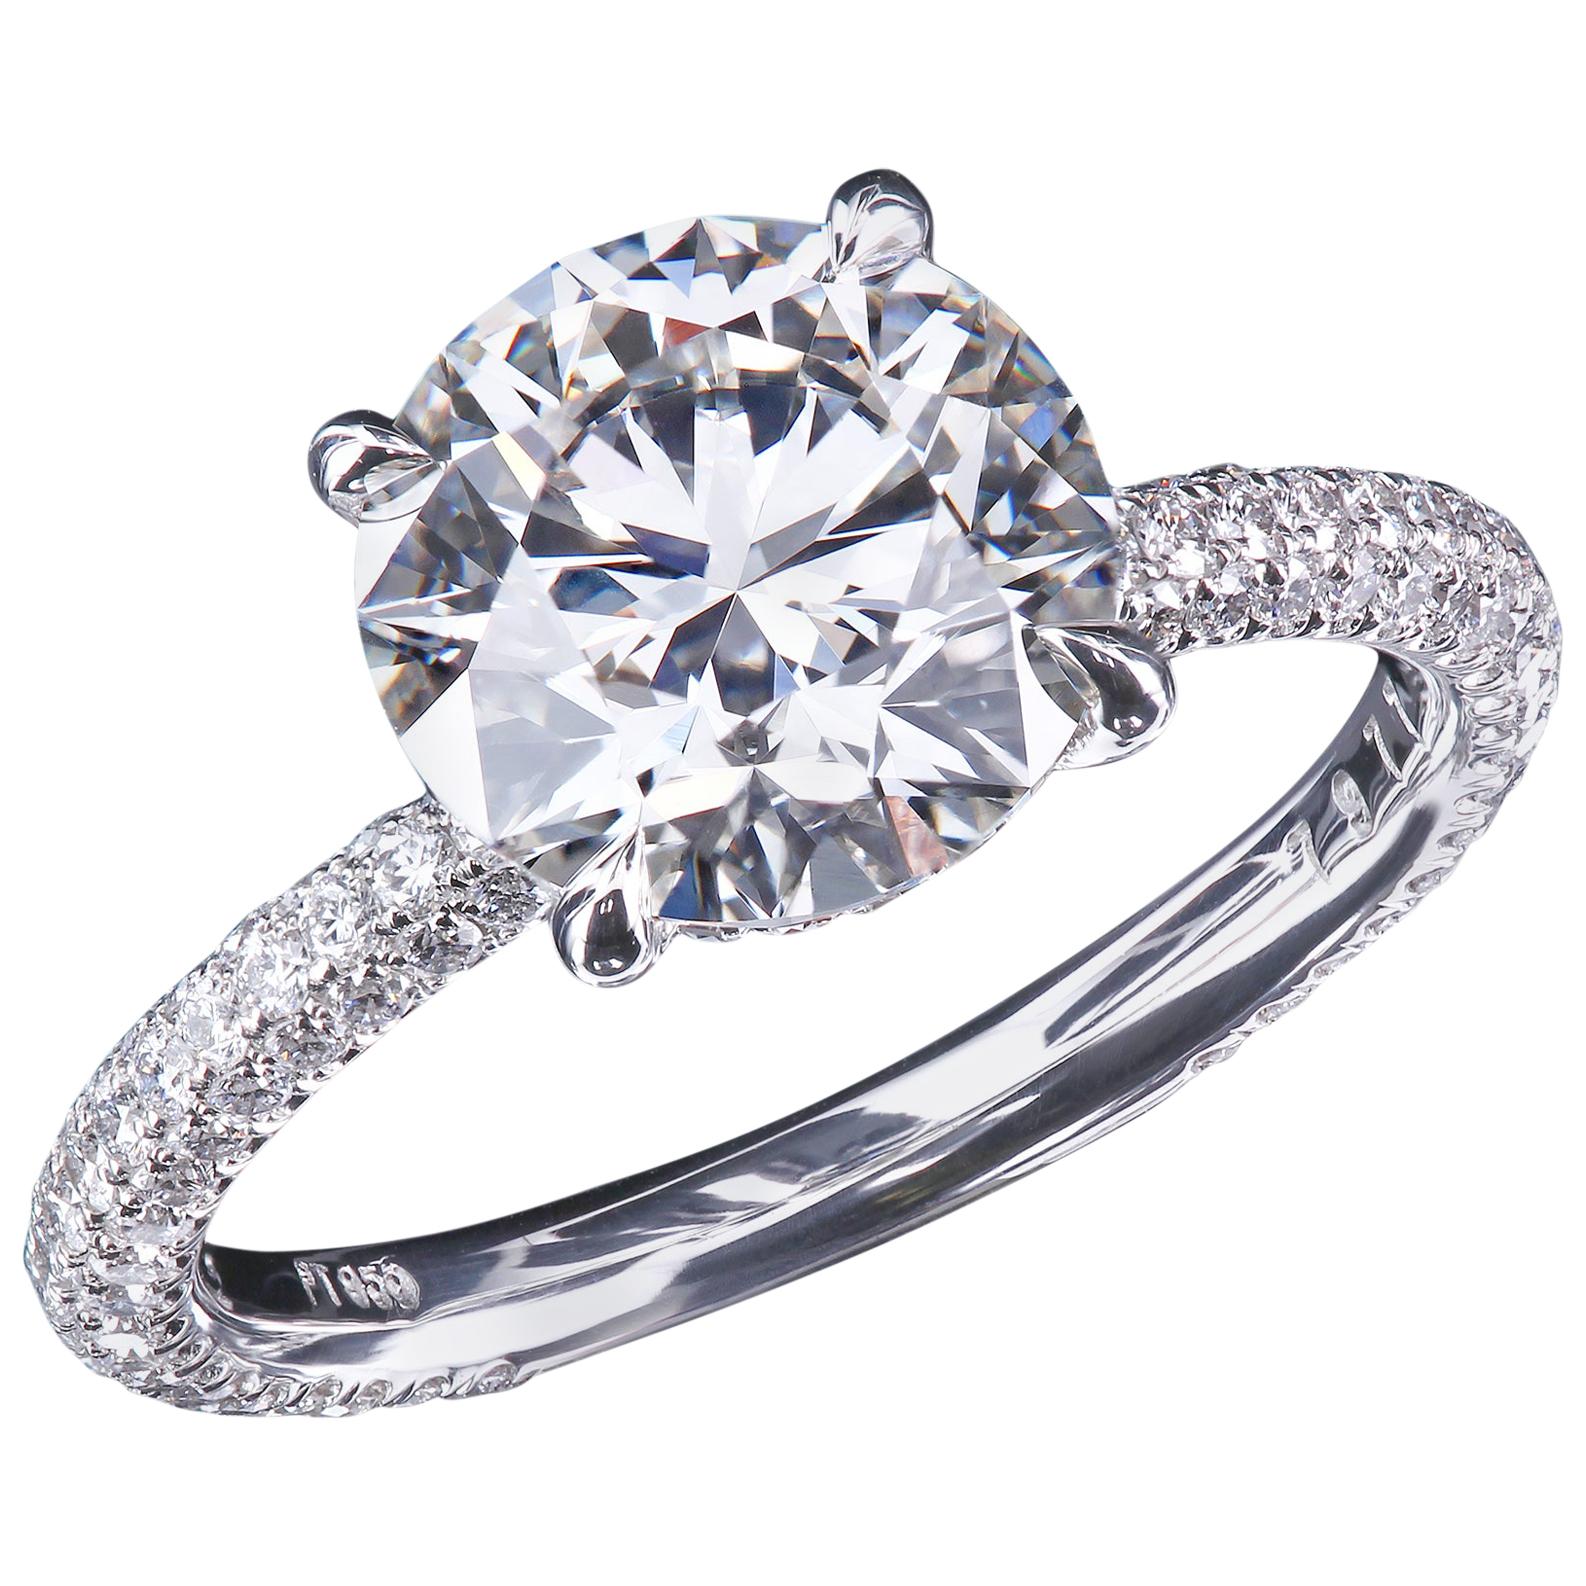 Leon Mege Micro Pave Platinum Solitaire with Two Carat GIA Certified Diamond